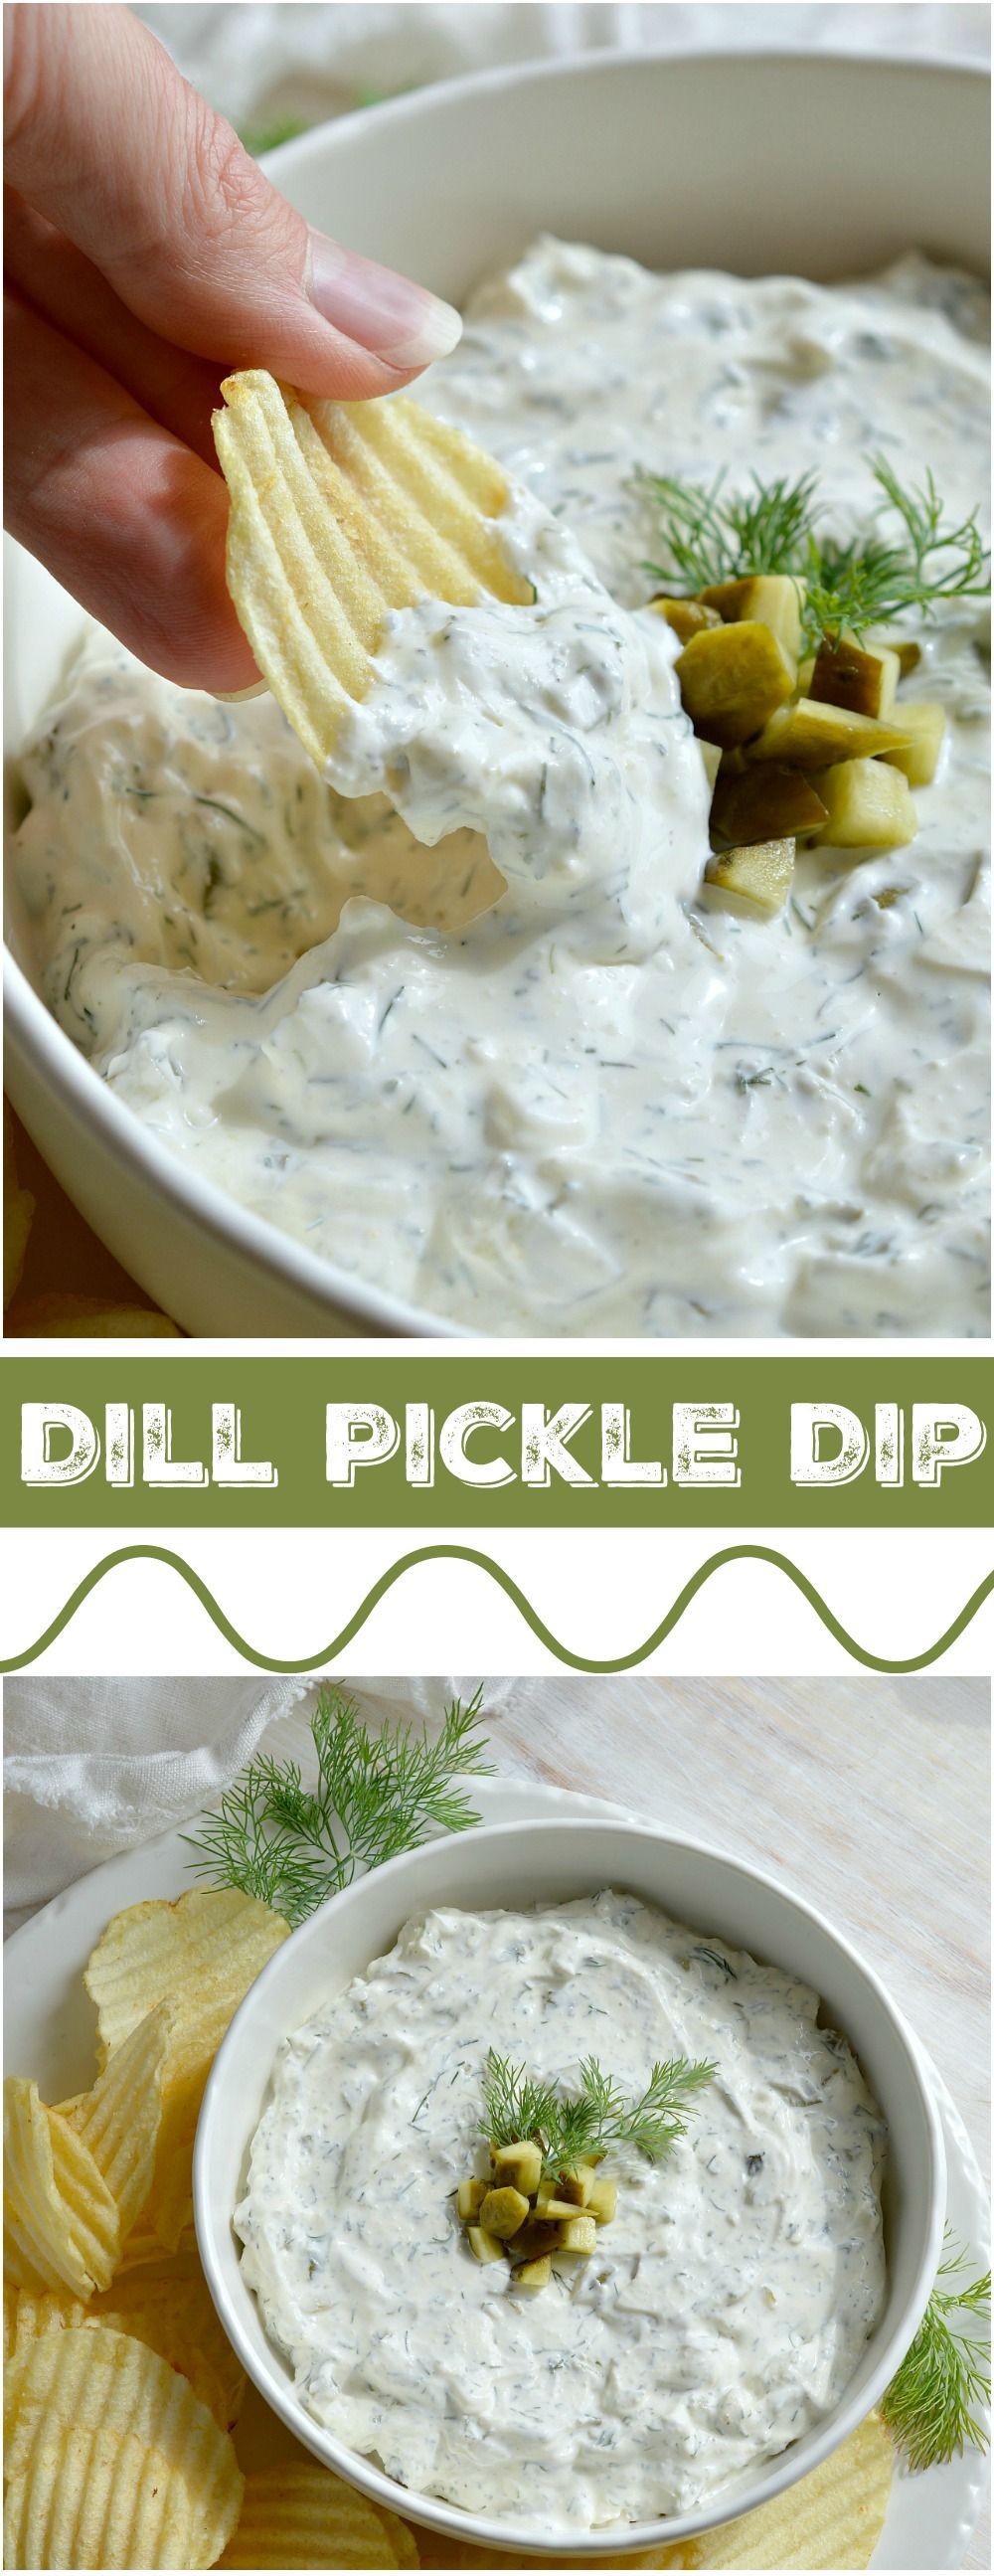 You NEED to try this Dill Pickle Dip recipe! Forget about french onion dip. This dip appetizer will be a n